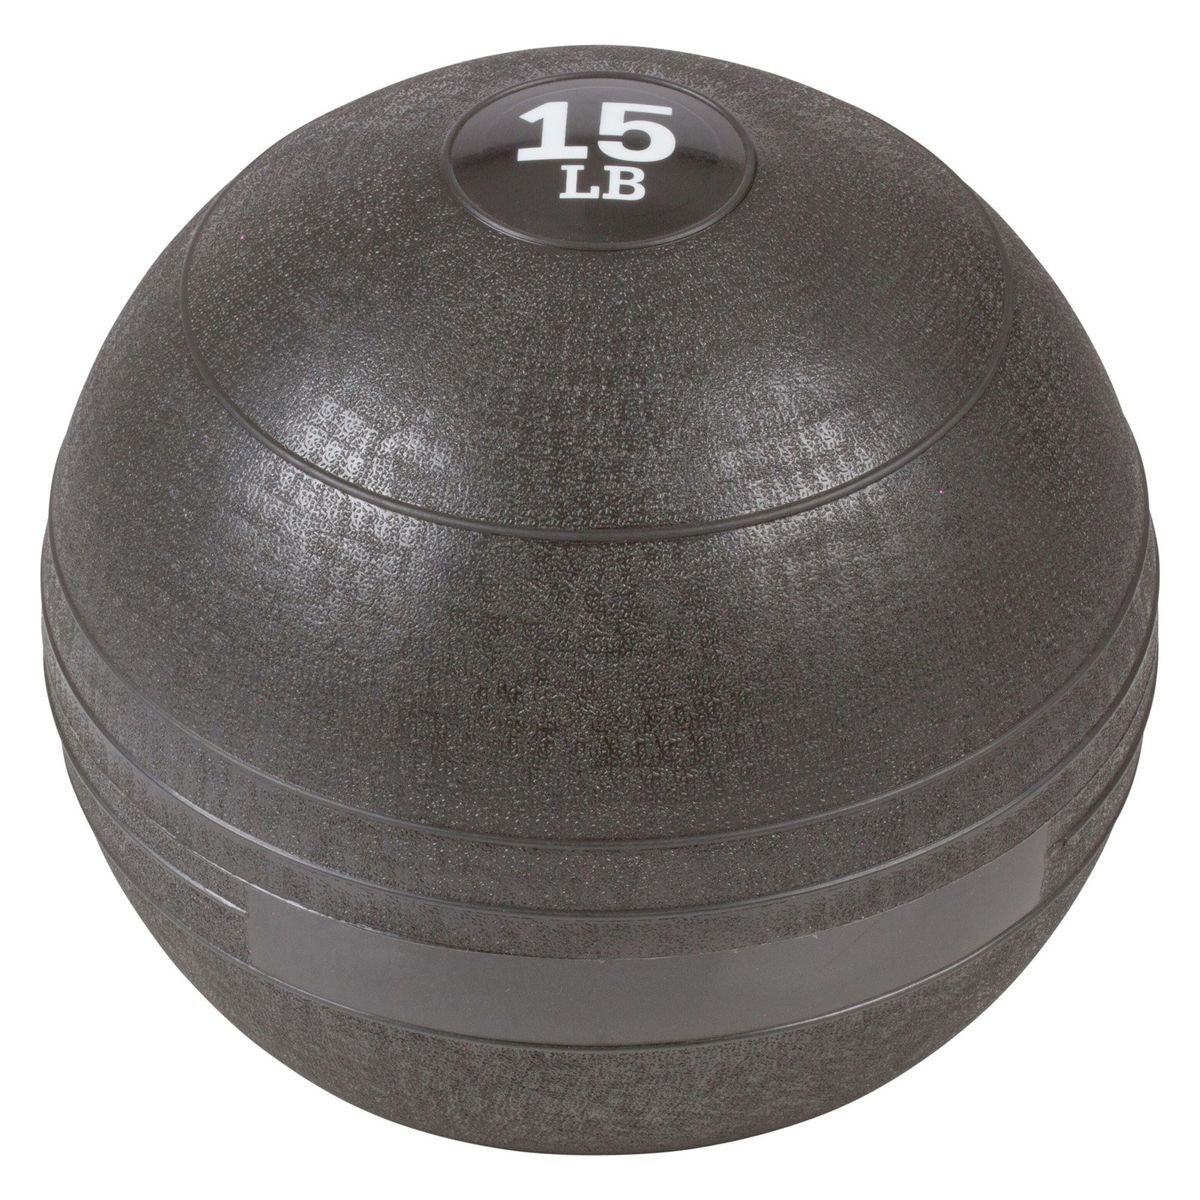 RDY 送料無料 Exercise Slam Medicine Ball by Trademark Innovations グレー 15ポンド 楽天海外通販 Exercise Slam Medicine Ball By Trademark Innovations Gray, 15 Lbs.